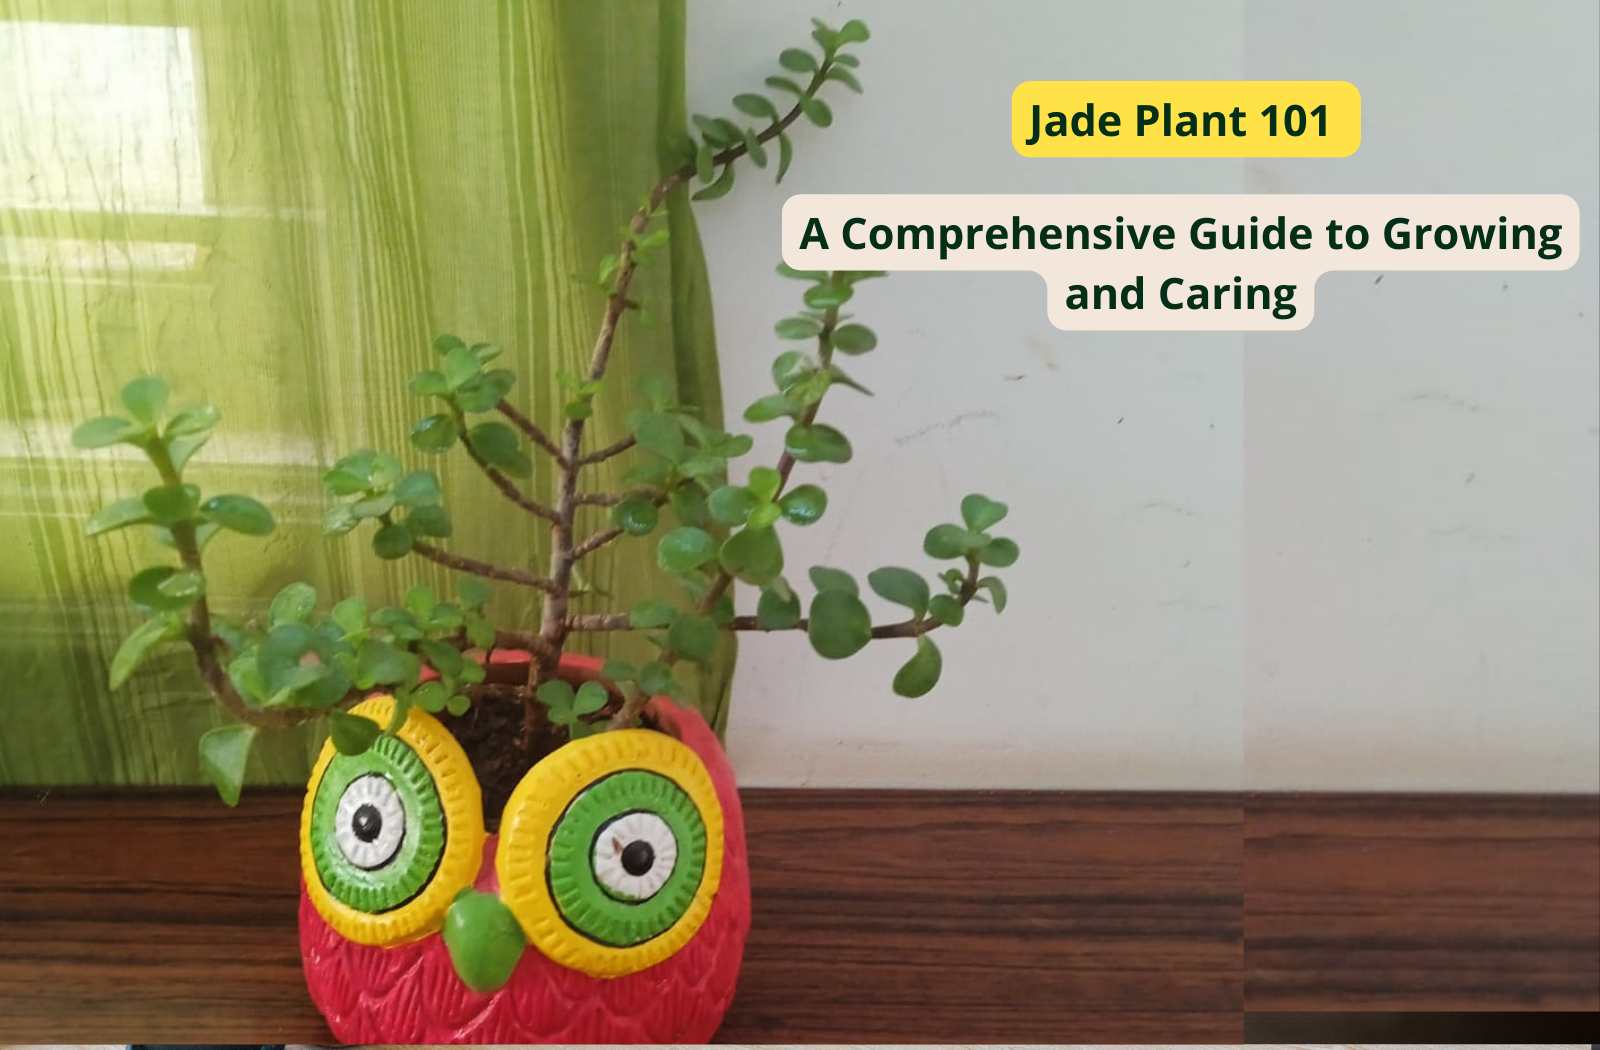 Jade Plant 101: A Comprehensive Guide to Growing and Caring